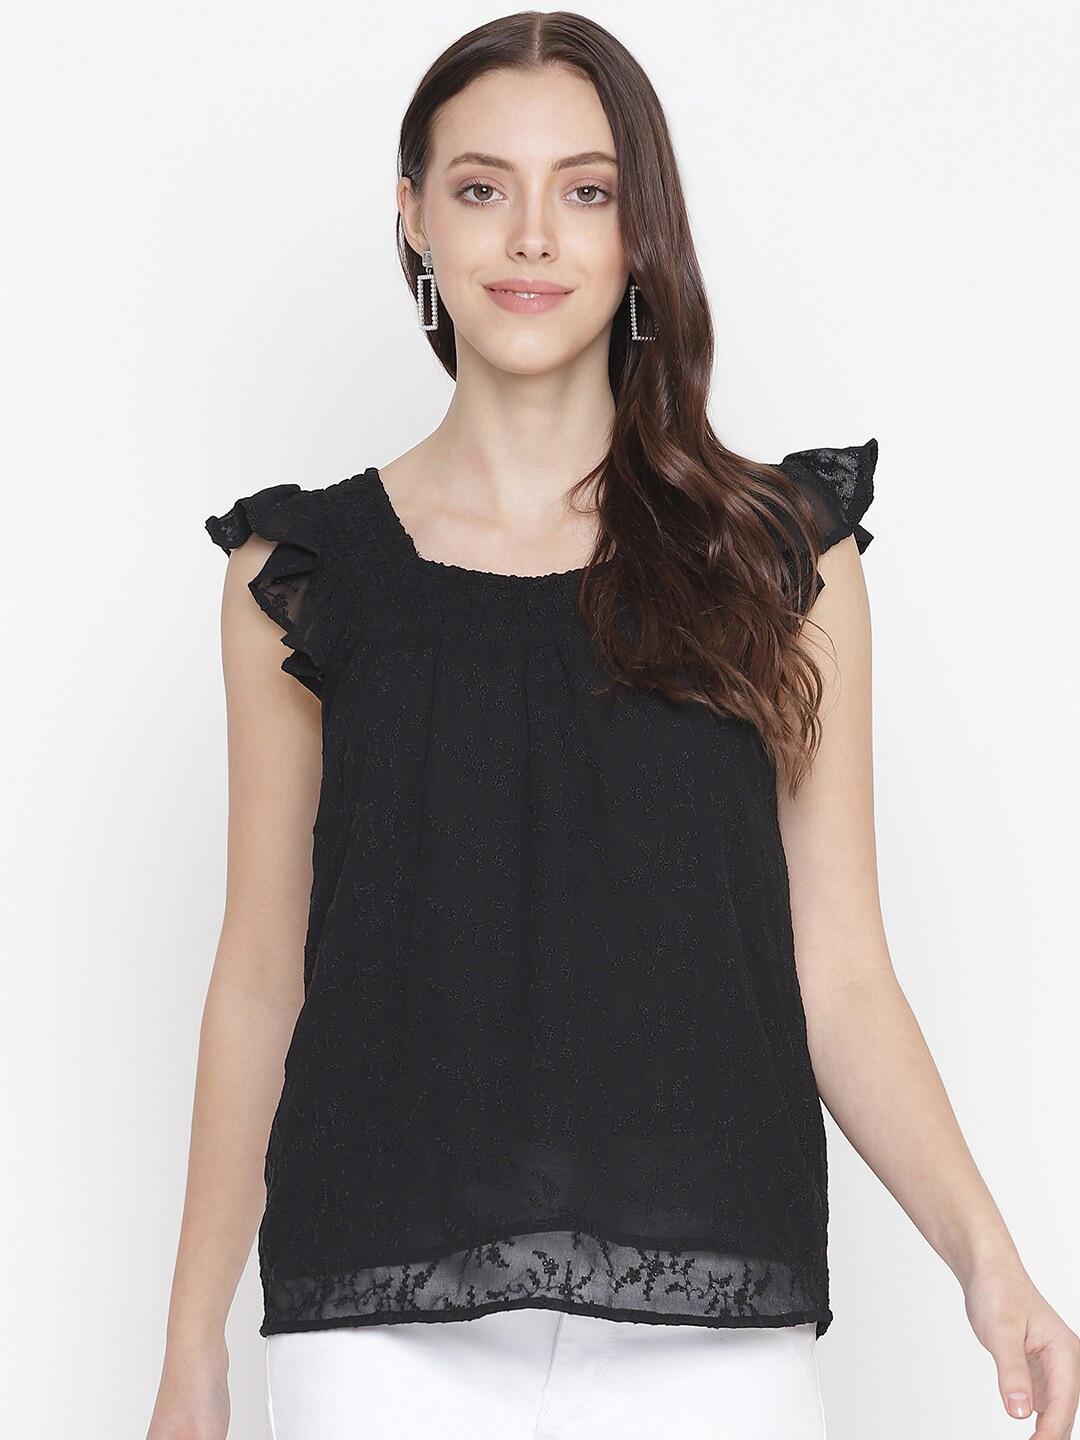 Oxolloxo Black Floral Embroidered Top